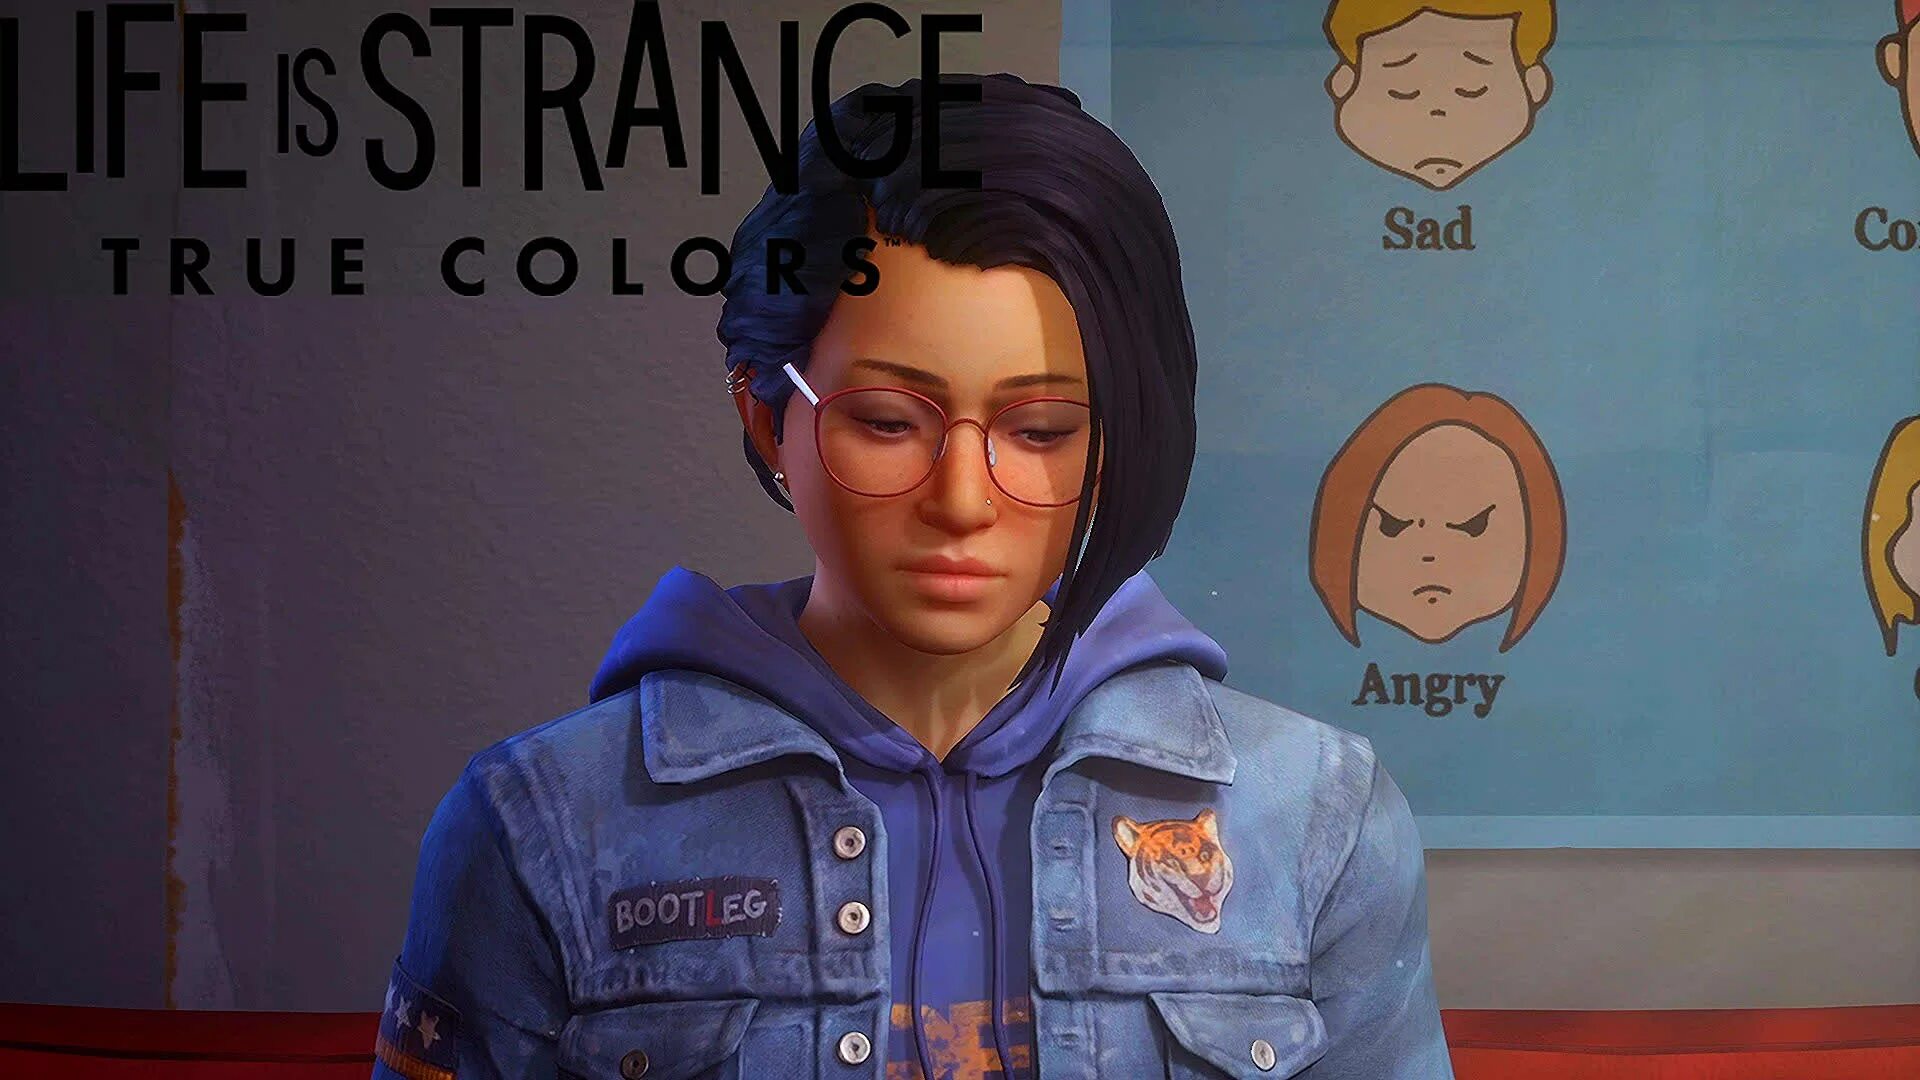 1wivfo life. Life is Strange true Colors Алекс. Алекс чень Life is Strange. Life is Strange 3 Alex. Life is Strange true Colors Алекс Чен.